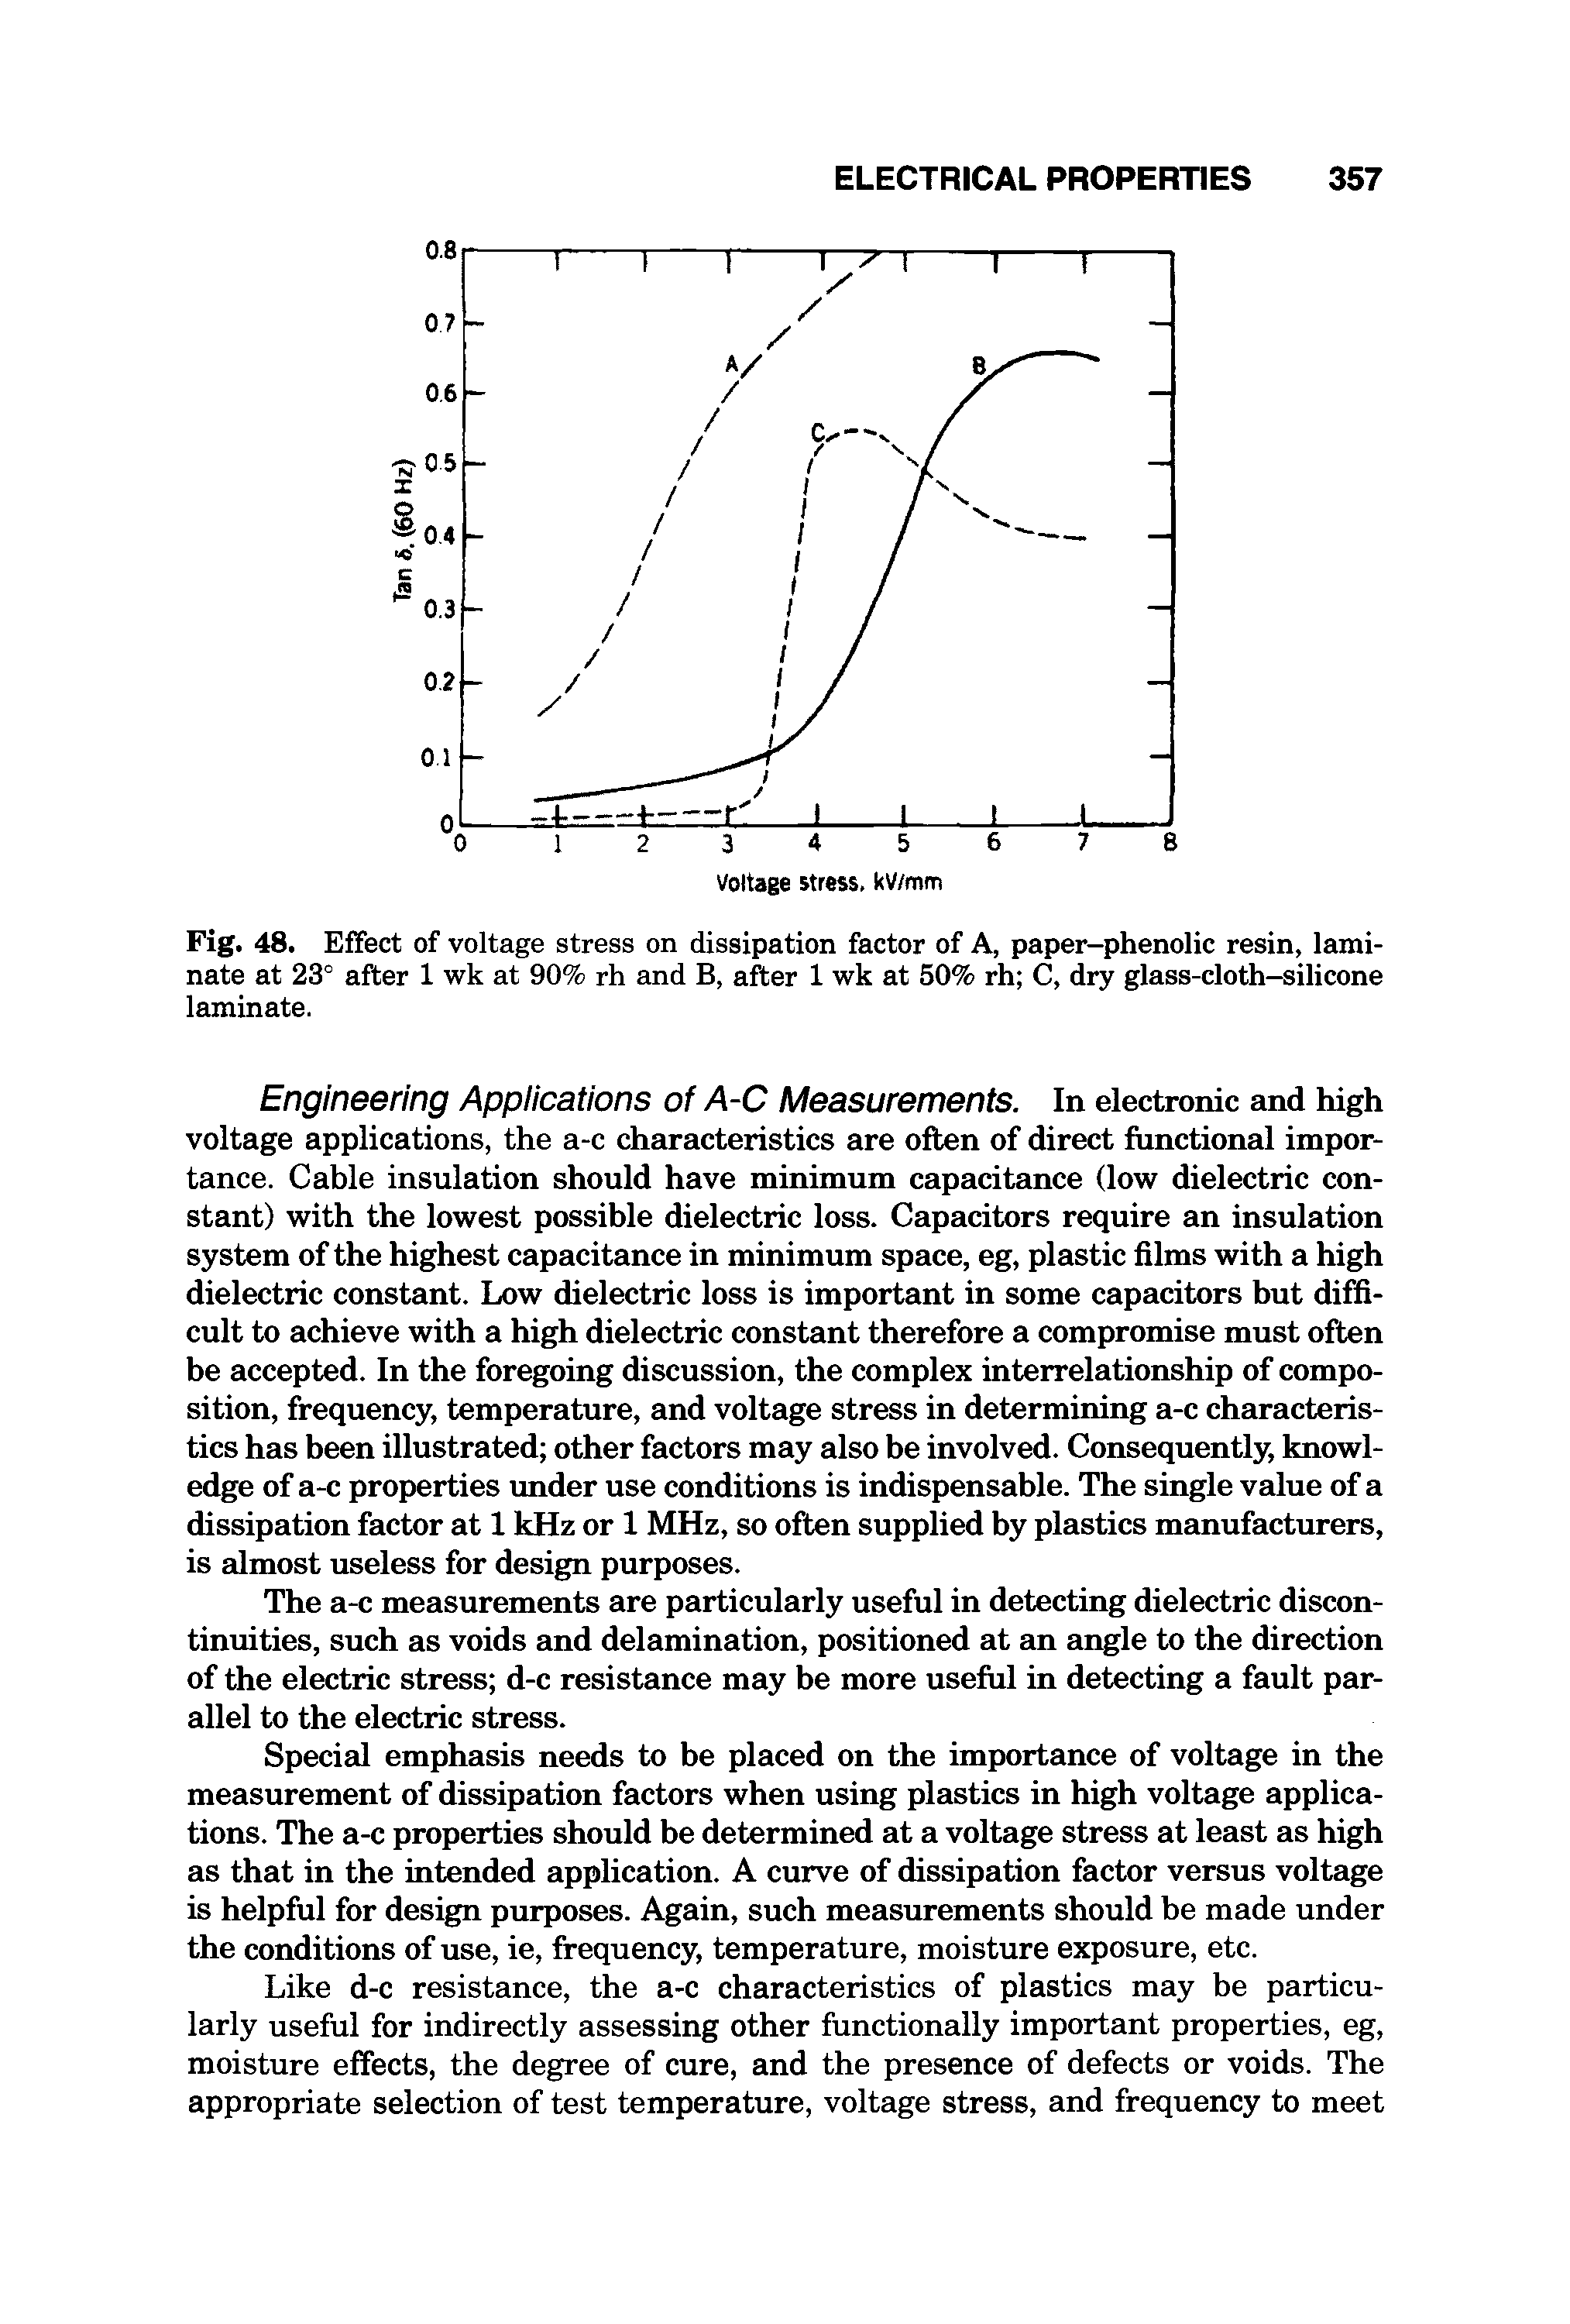 Fig. 48. Effect of voltage stress on dissipation factor of A, paper-phenolic resin, laminate at 23° after 1 wk at 90% rh and B, after 1 wk at 50% rh C, dry glass-cloth-silicone laminate.